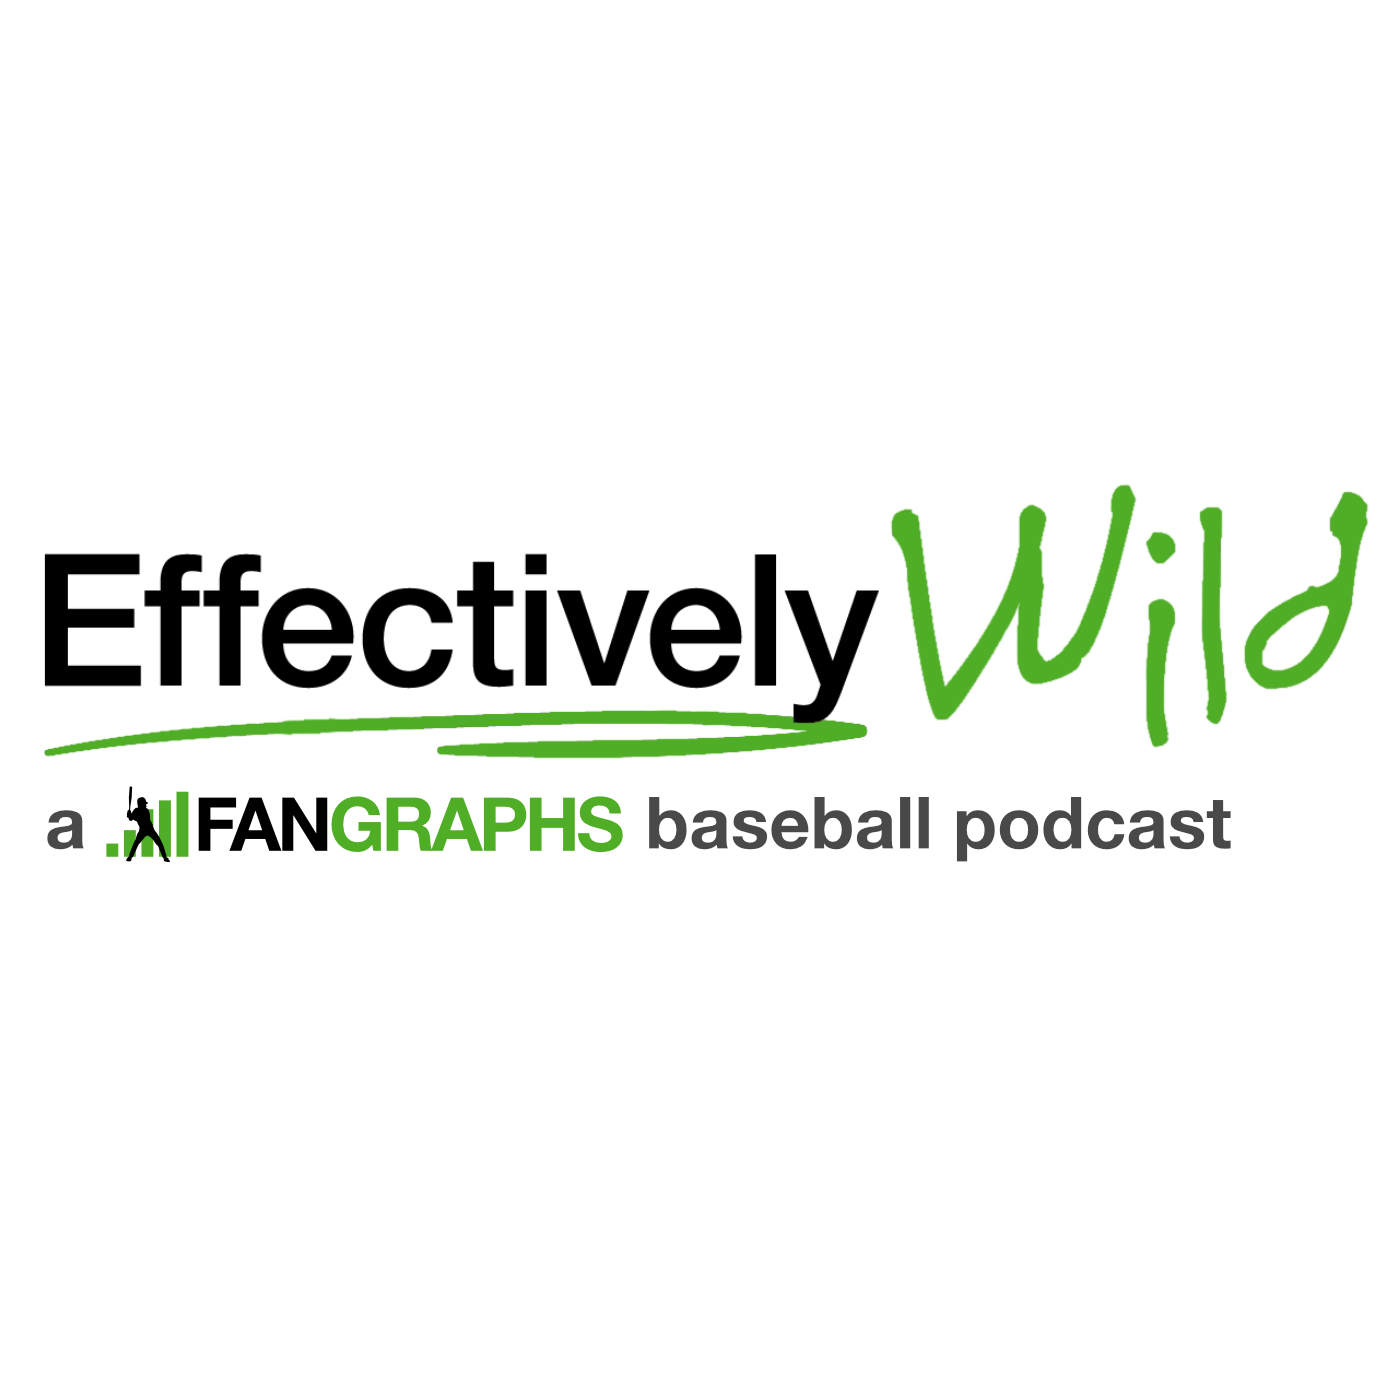 A highlight from Effectively Wild Episode 1995: Stink or Swim